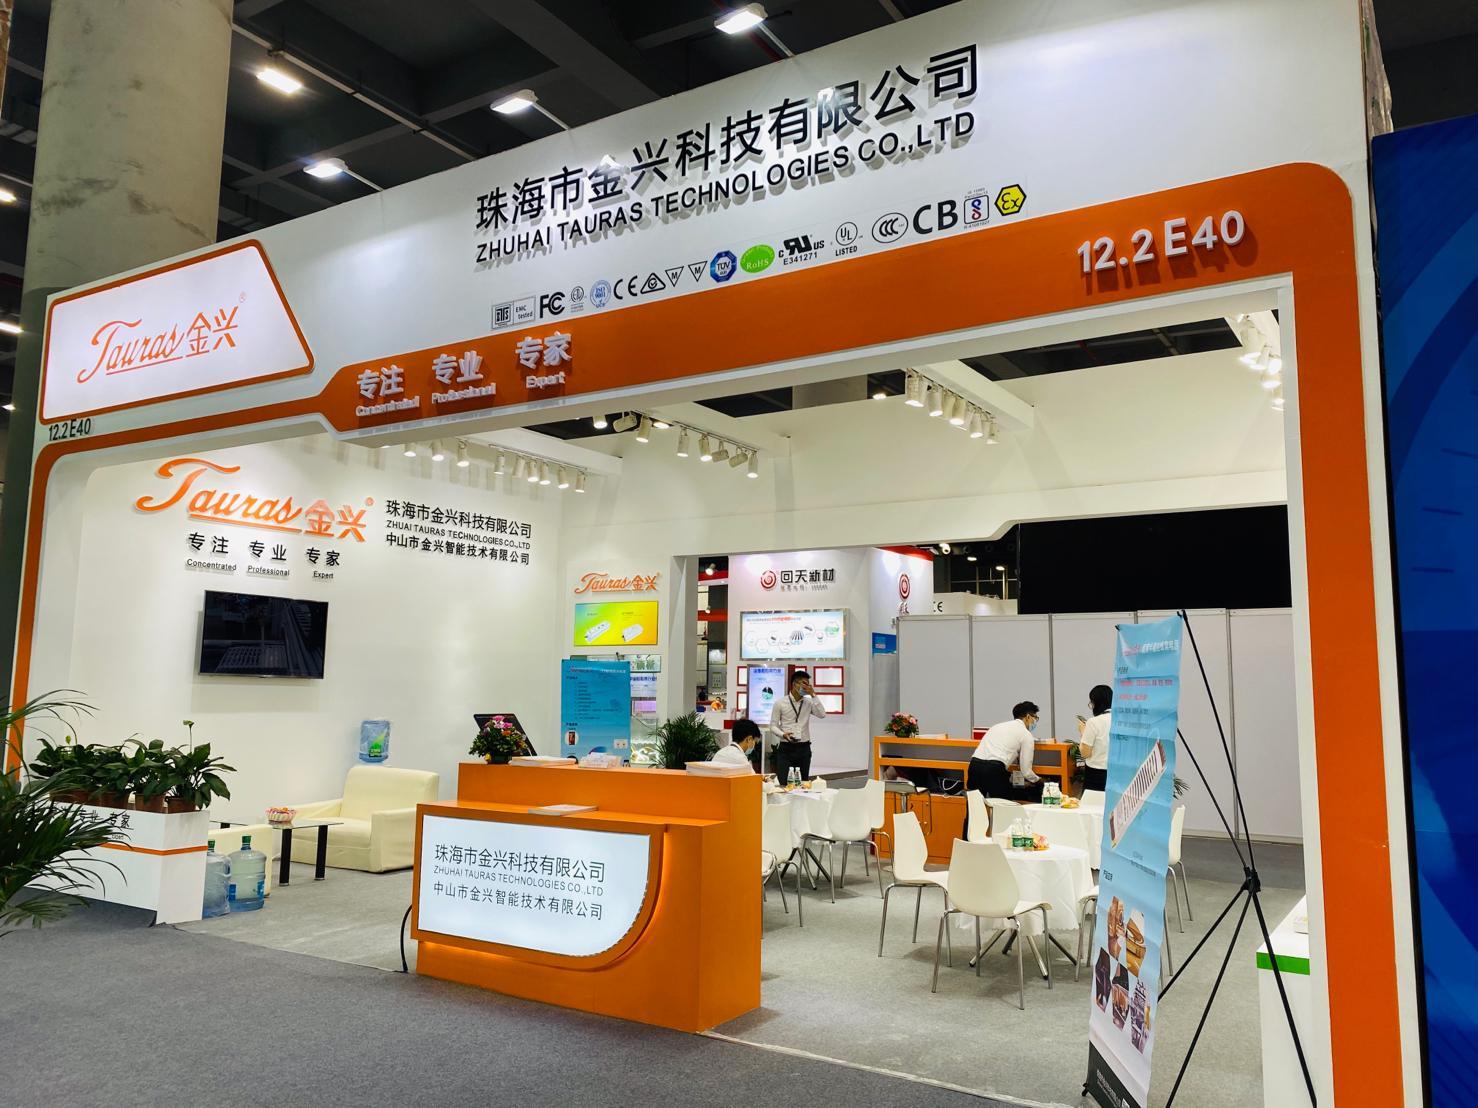 Welcome to Meet Us at Guangzhou International Lighting Exhibition